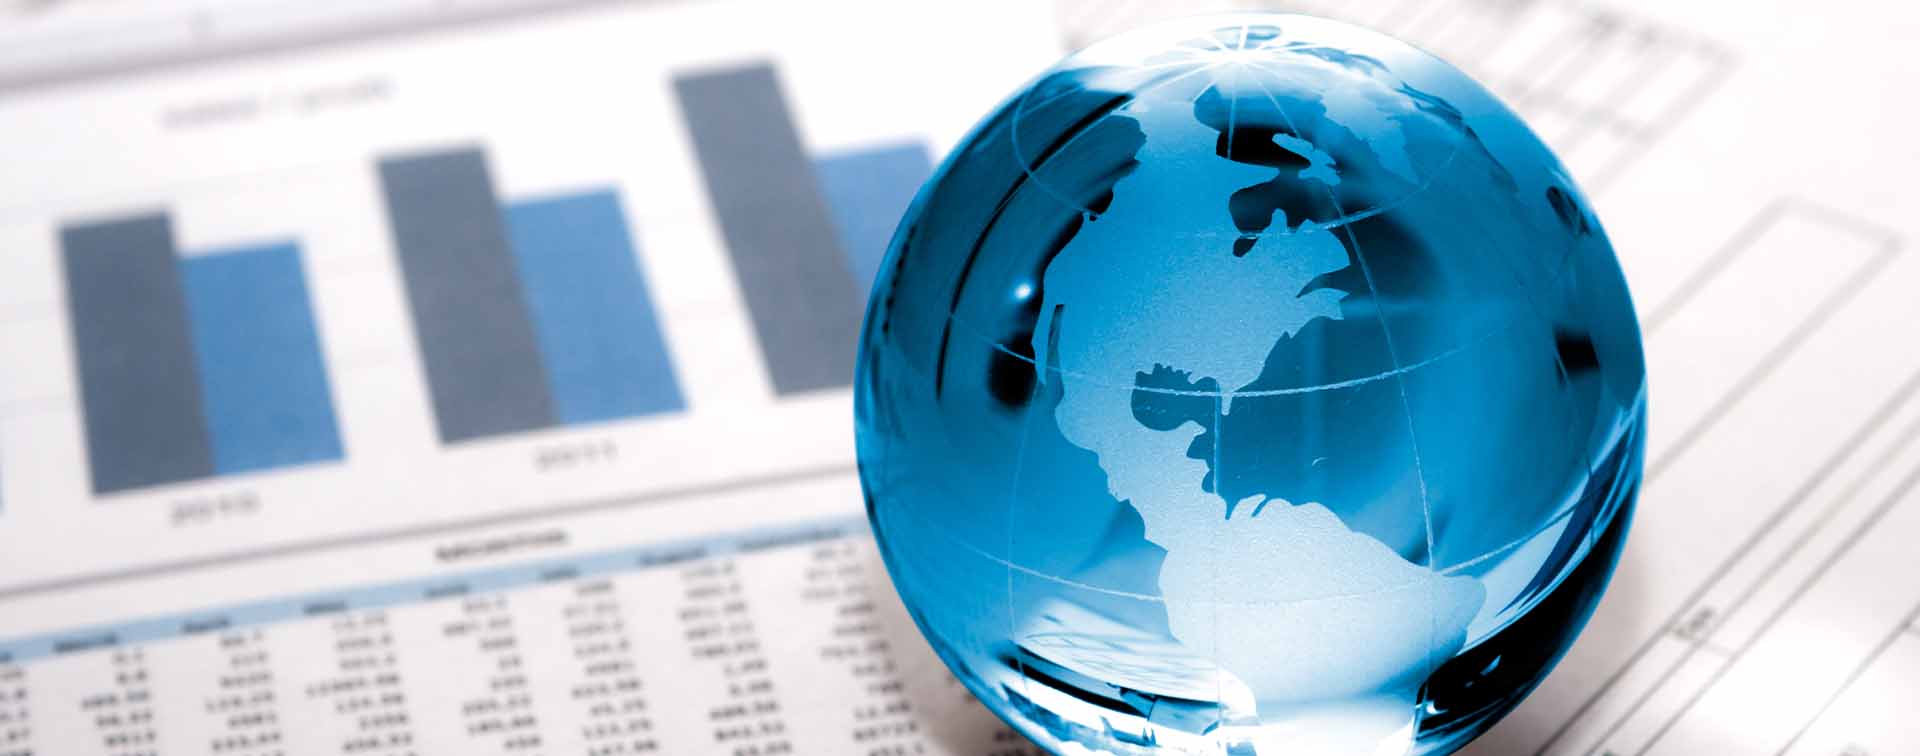 A glass globe on business papers